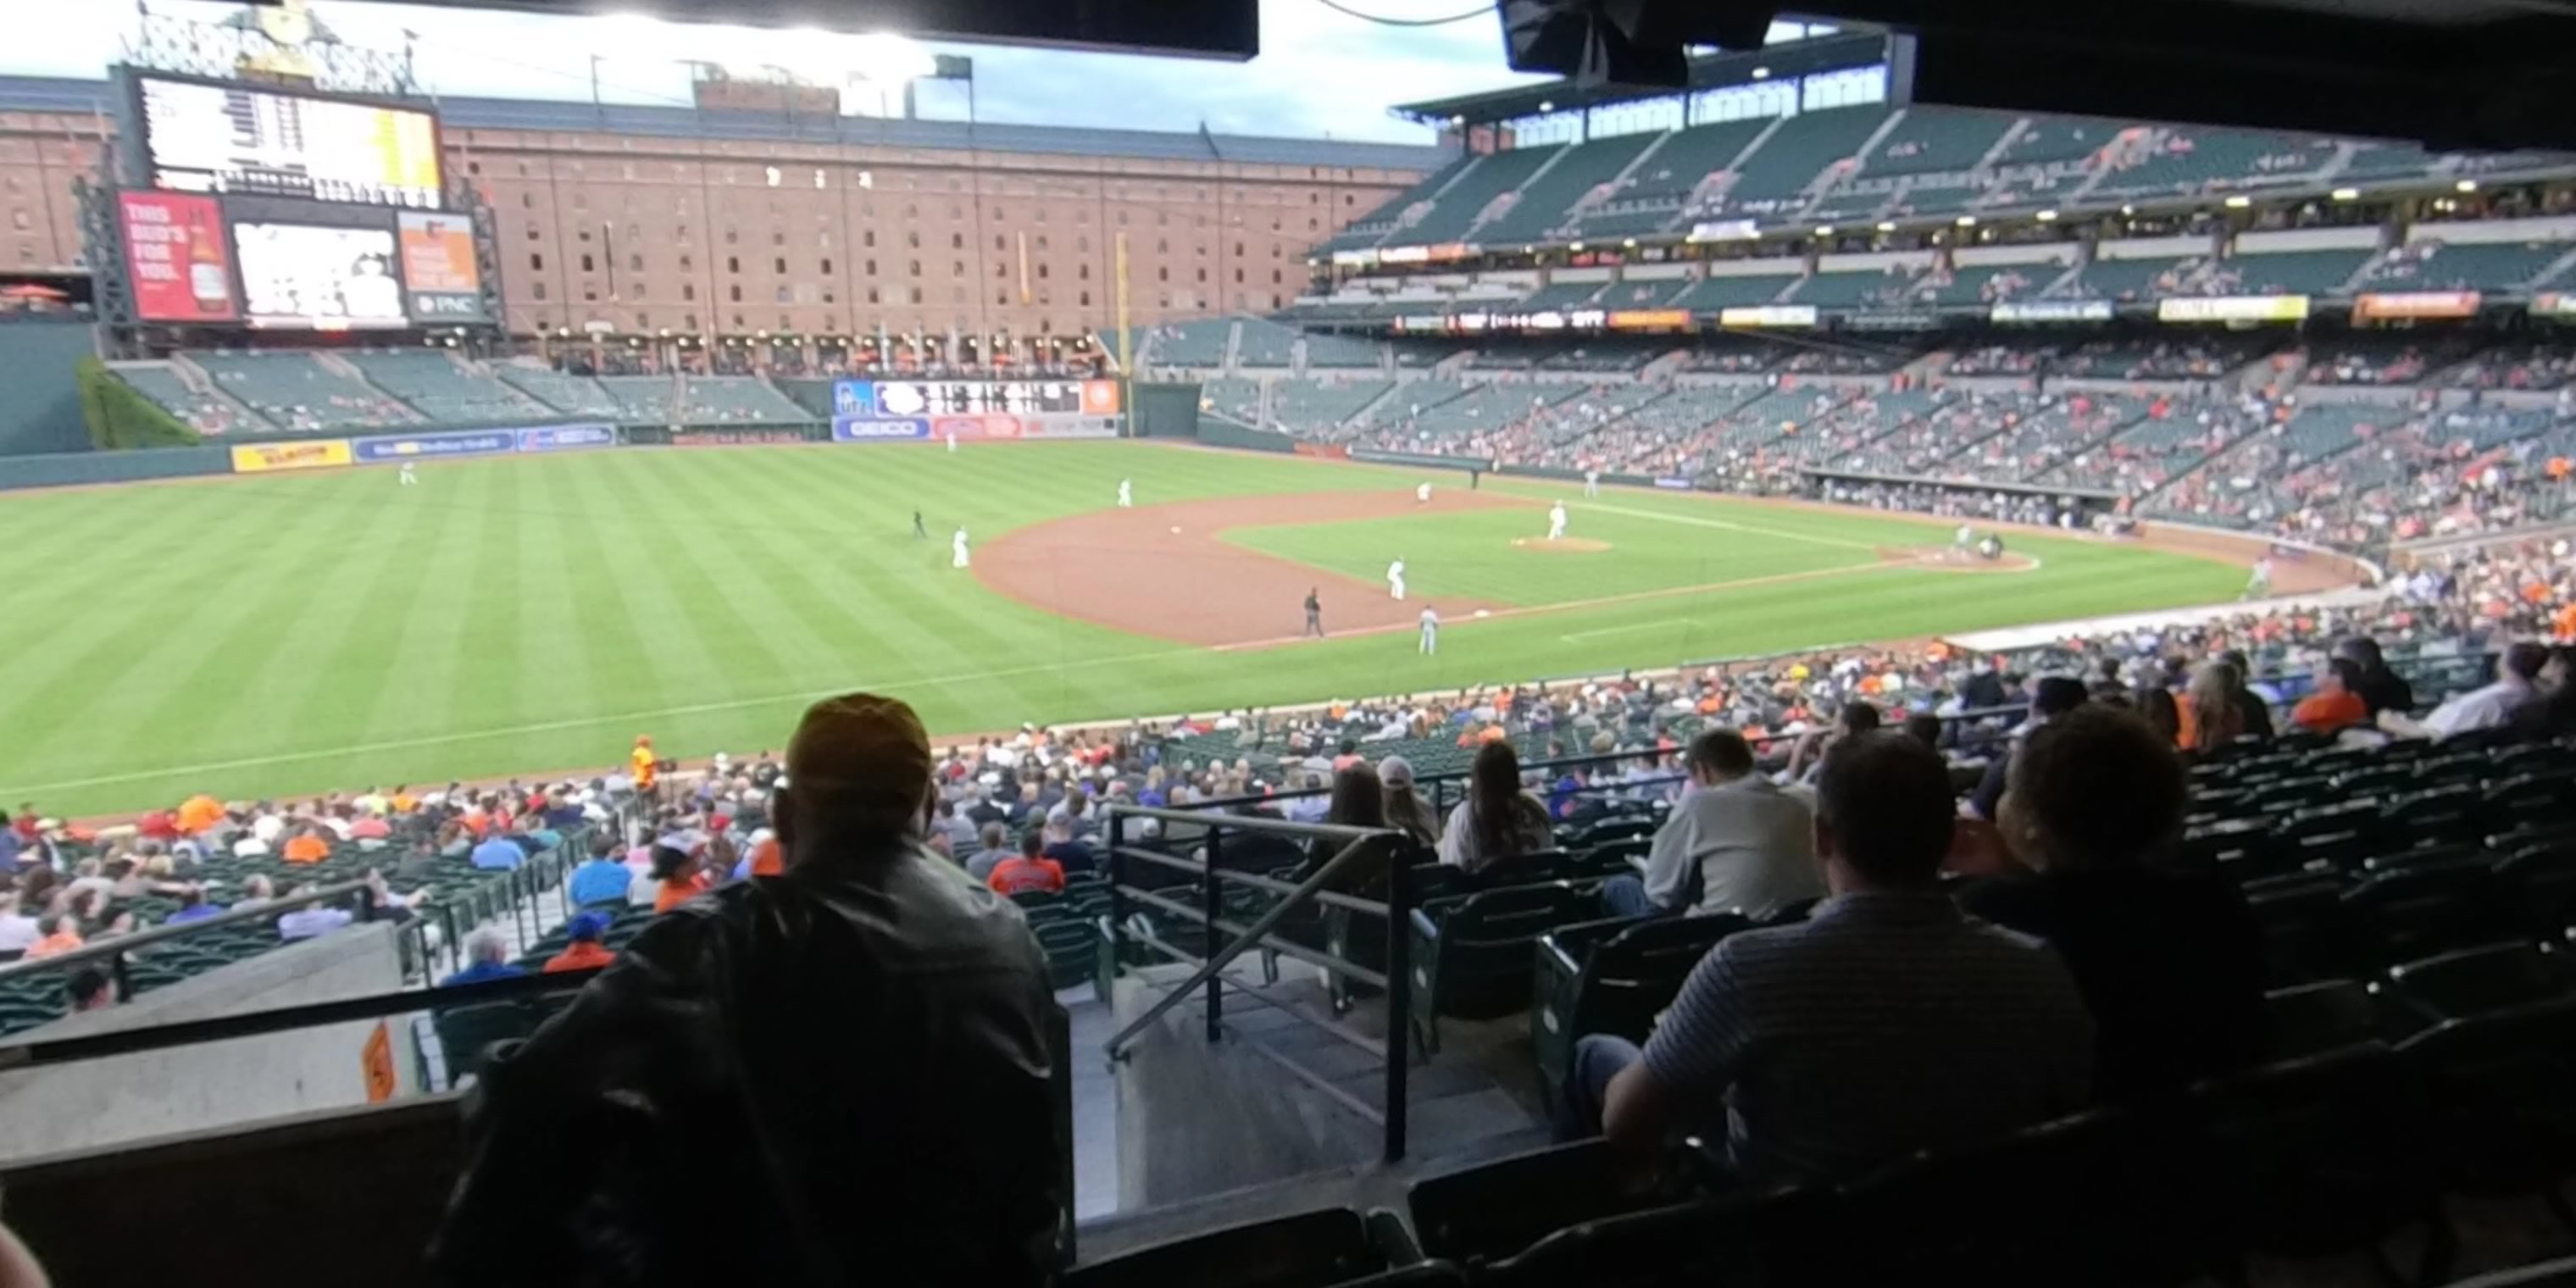 section 59 panoramic seat view  - oriole park